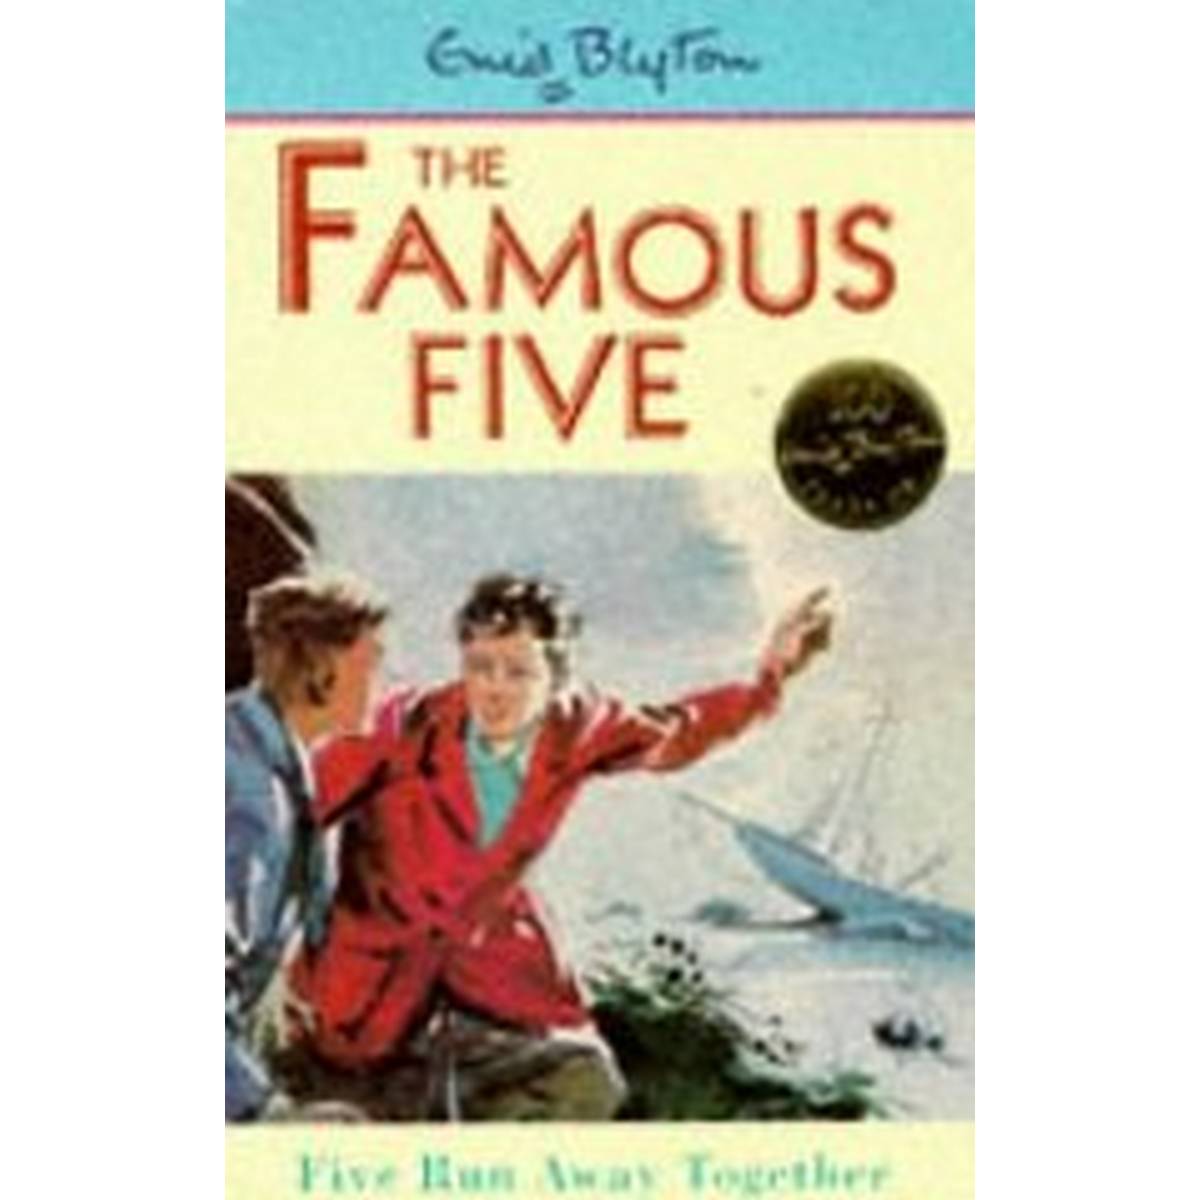 Five Run away Together (Famous Five)